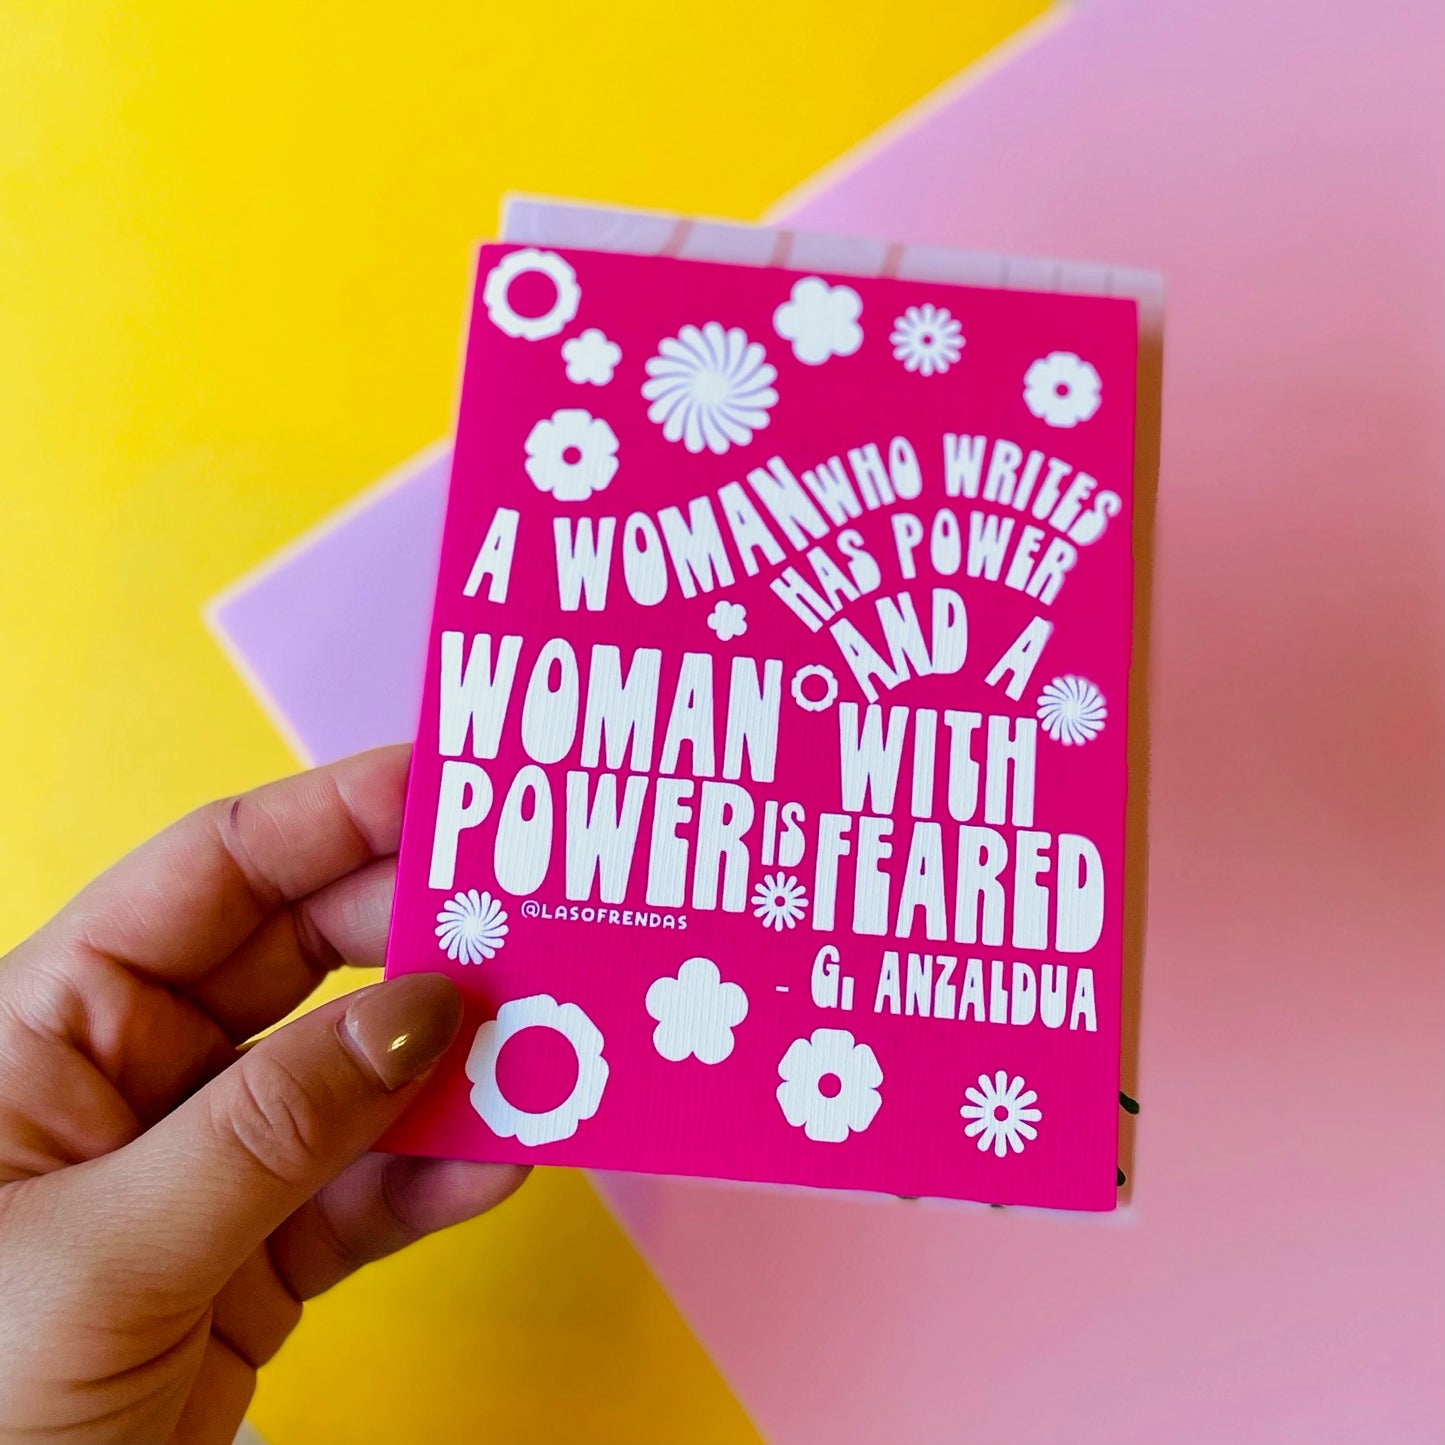 A women who writes has power and a women with power is feared - Gloria Anzaldua Quote Greeting Card